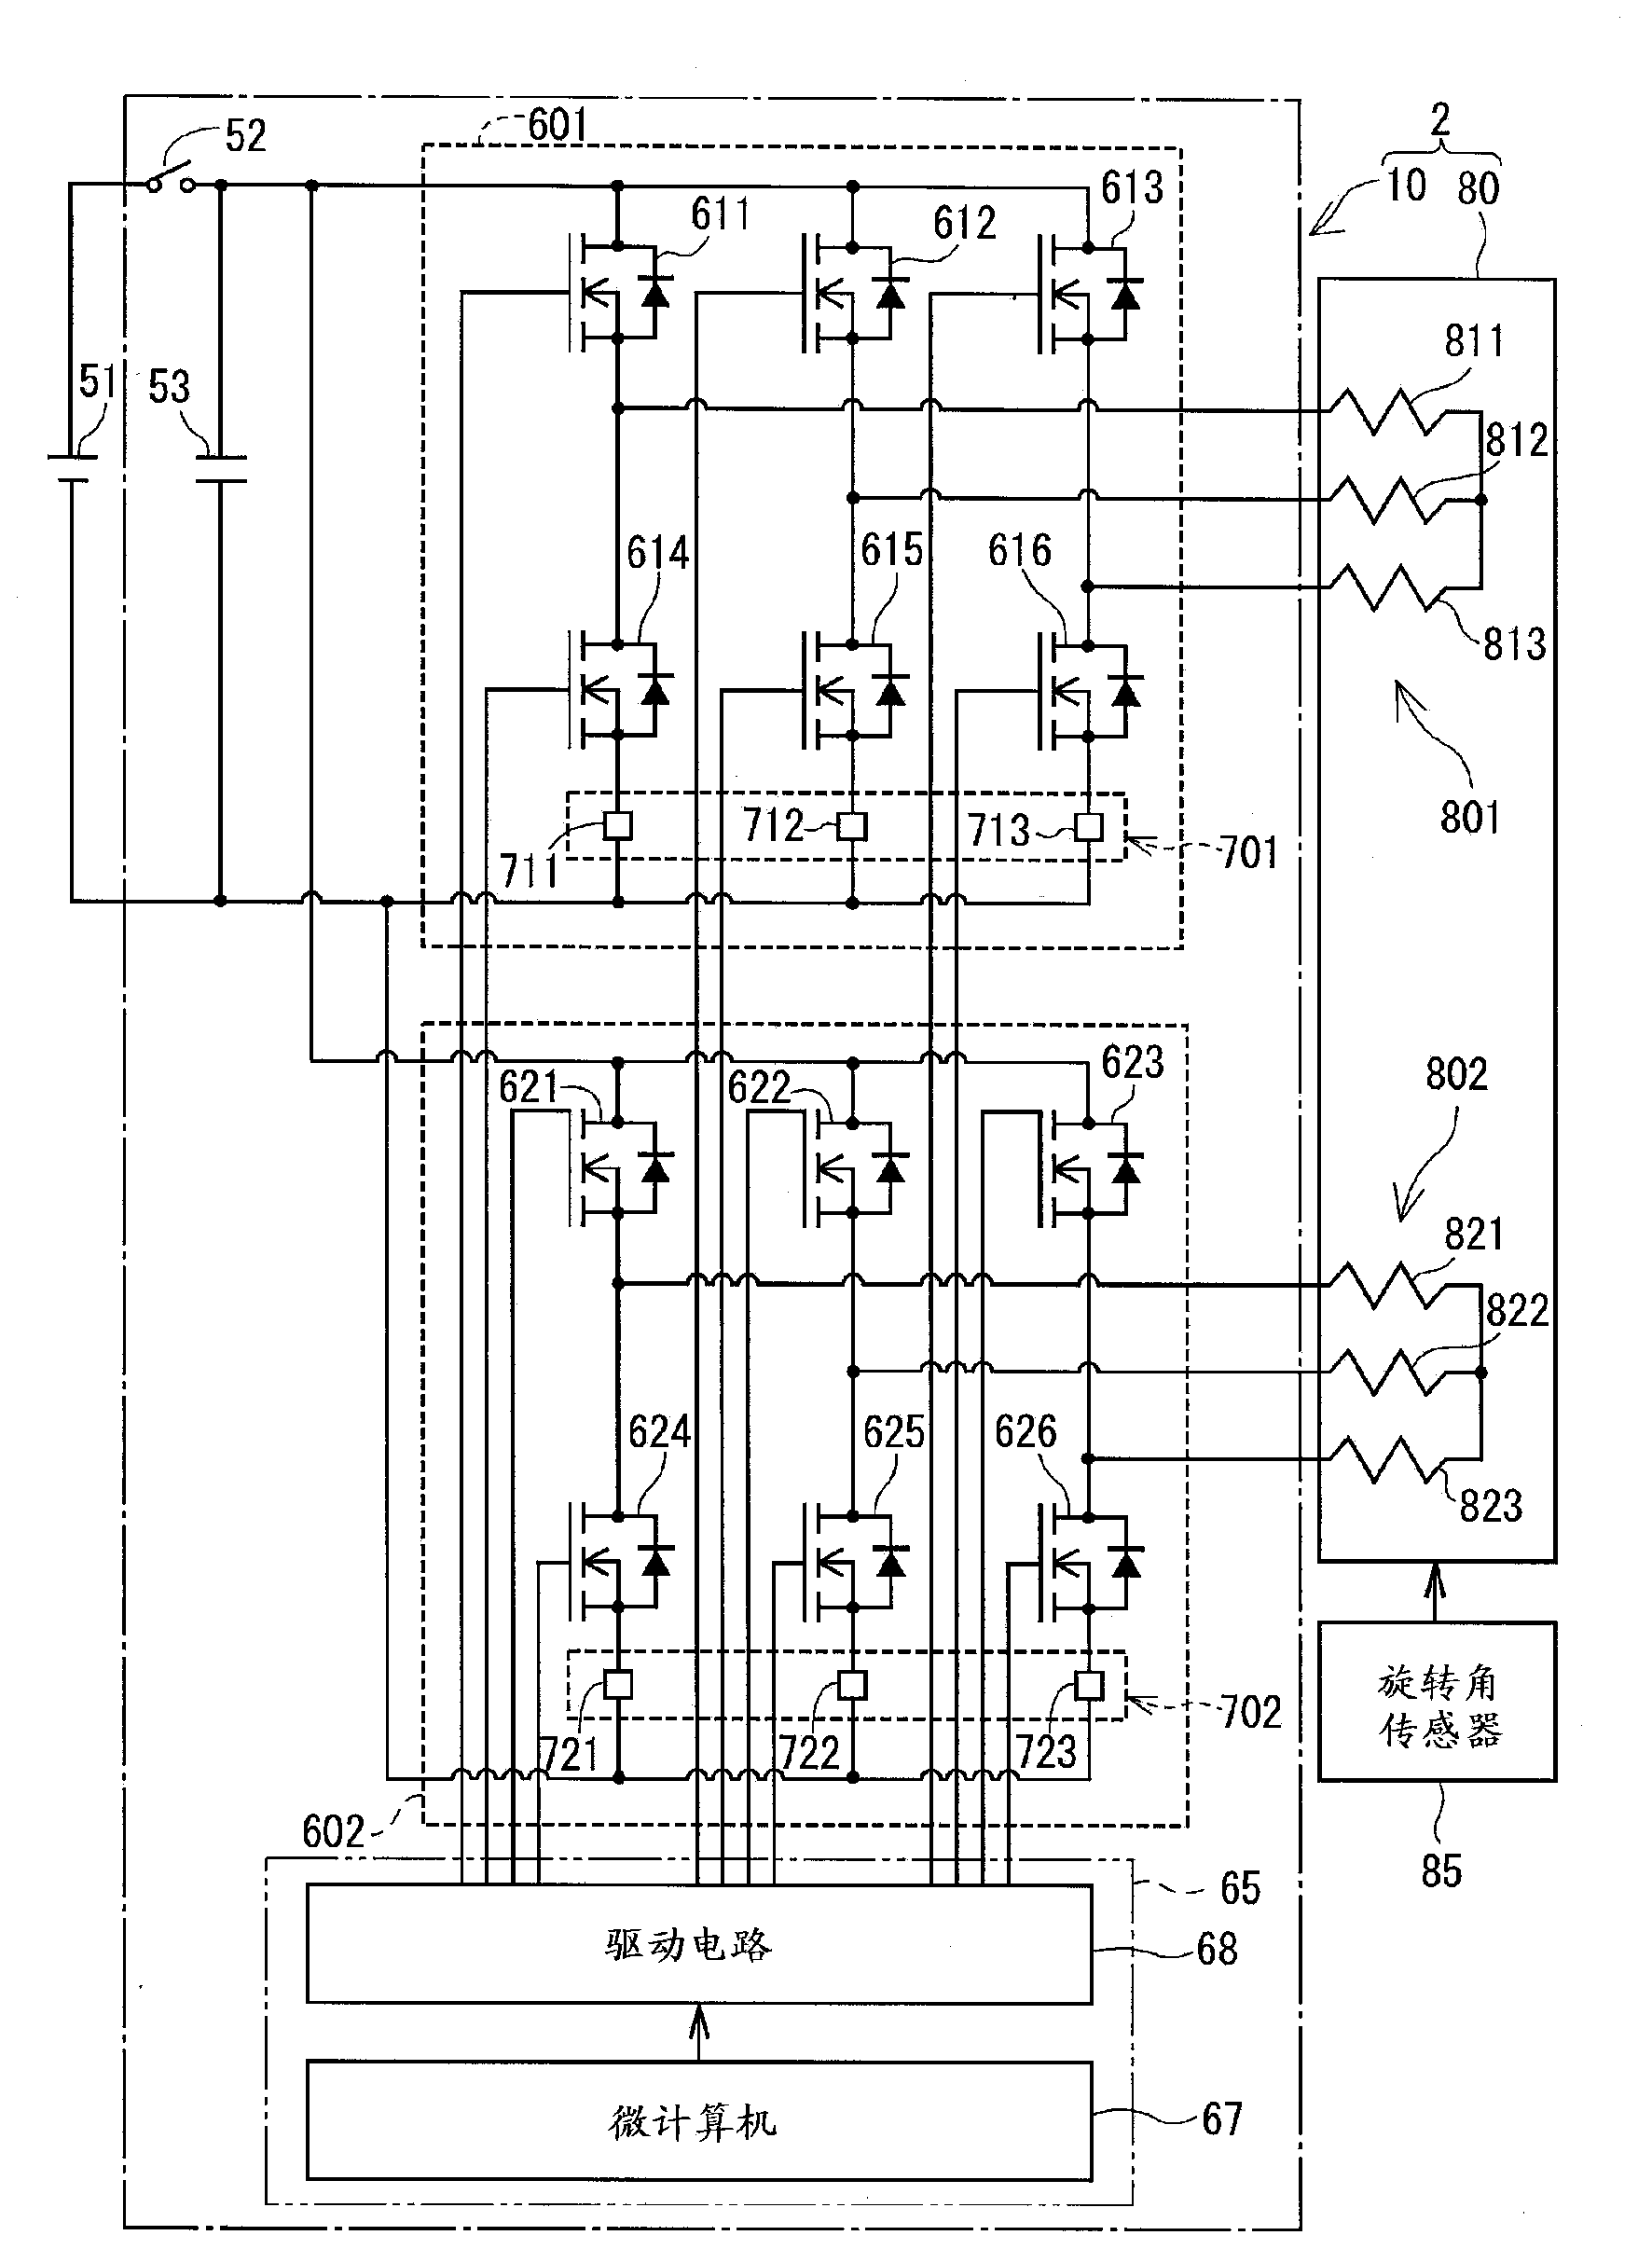 Control device for a three-phase rotating machine